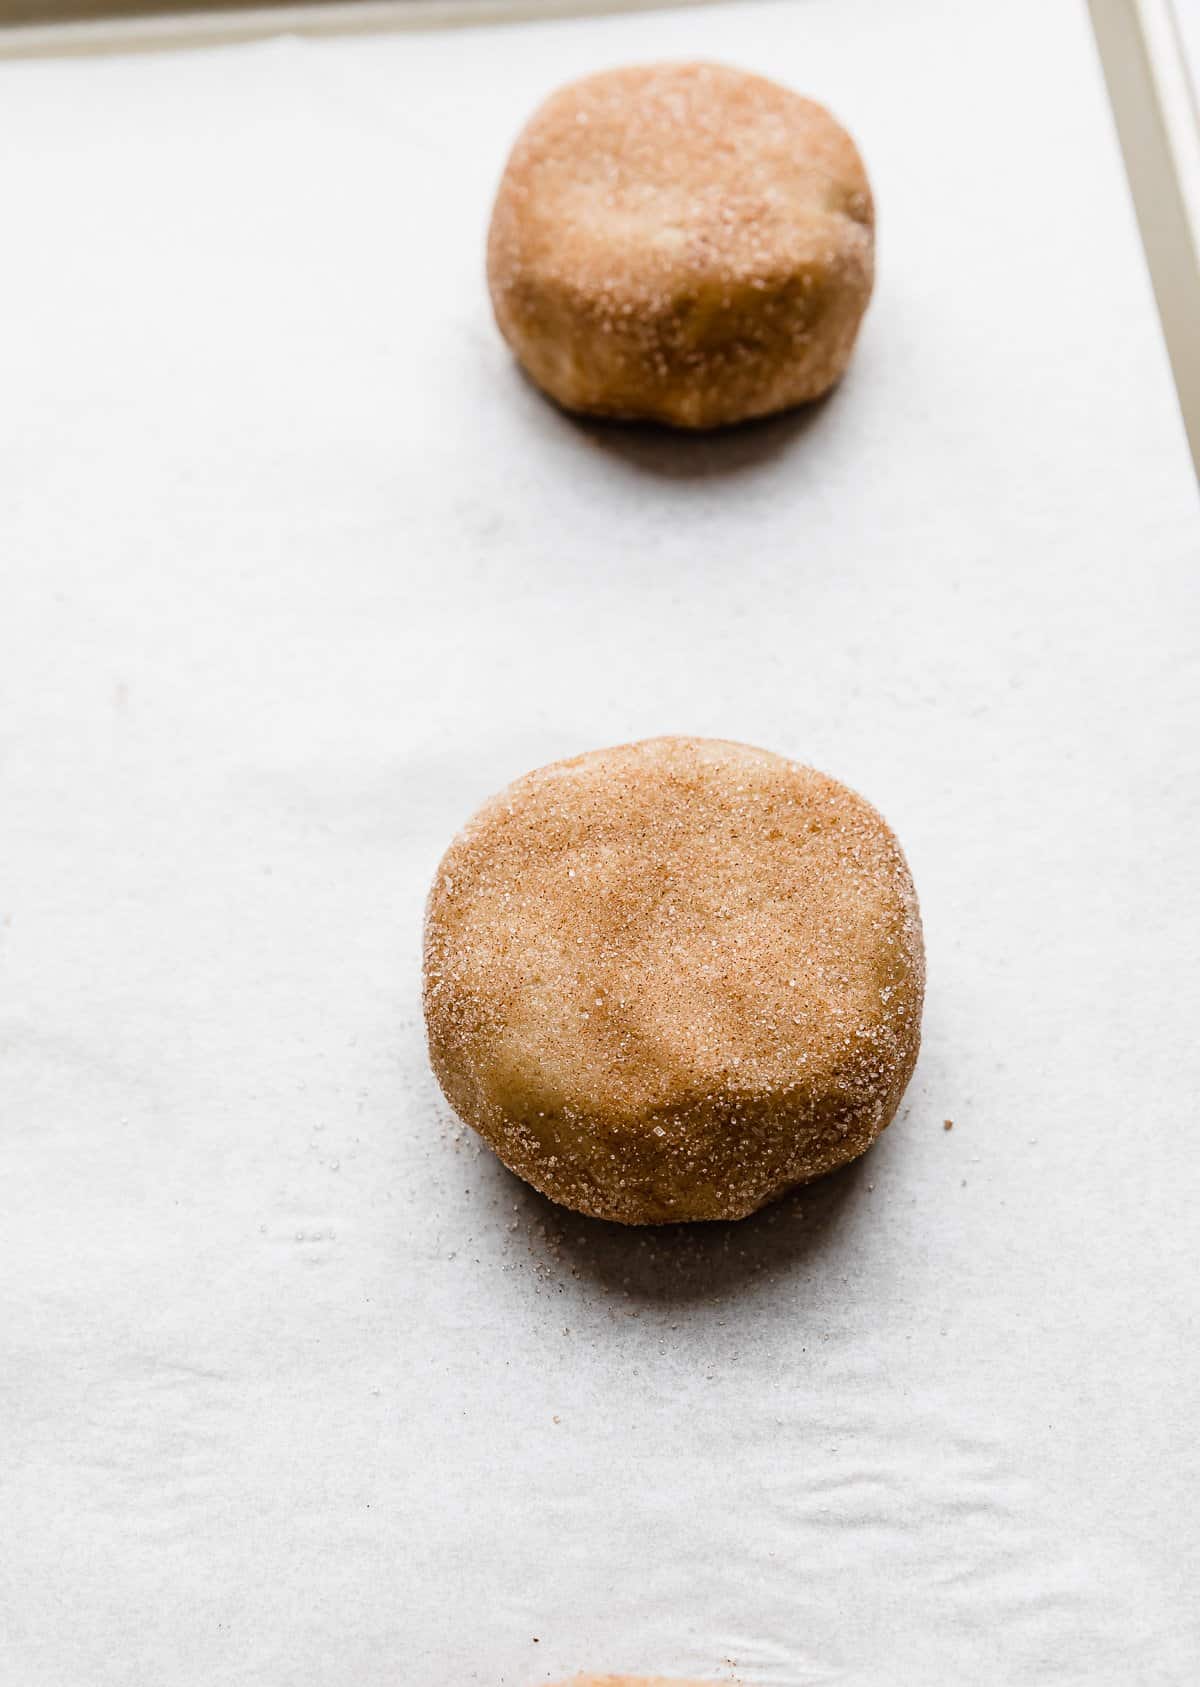 An unbaked ball of Crumbl Hazelnut Churro Cookie dough on a white parchment lined baking sheet.